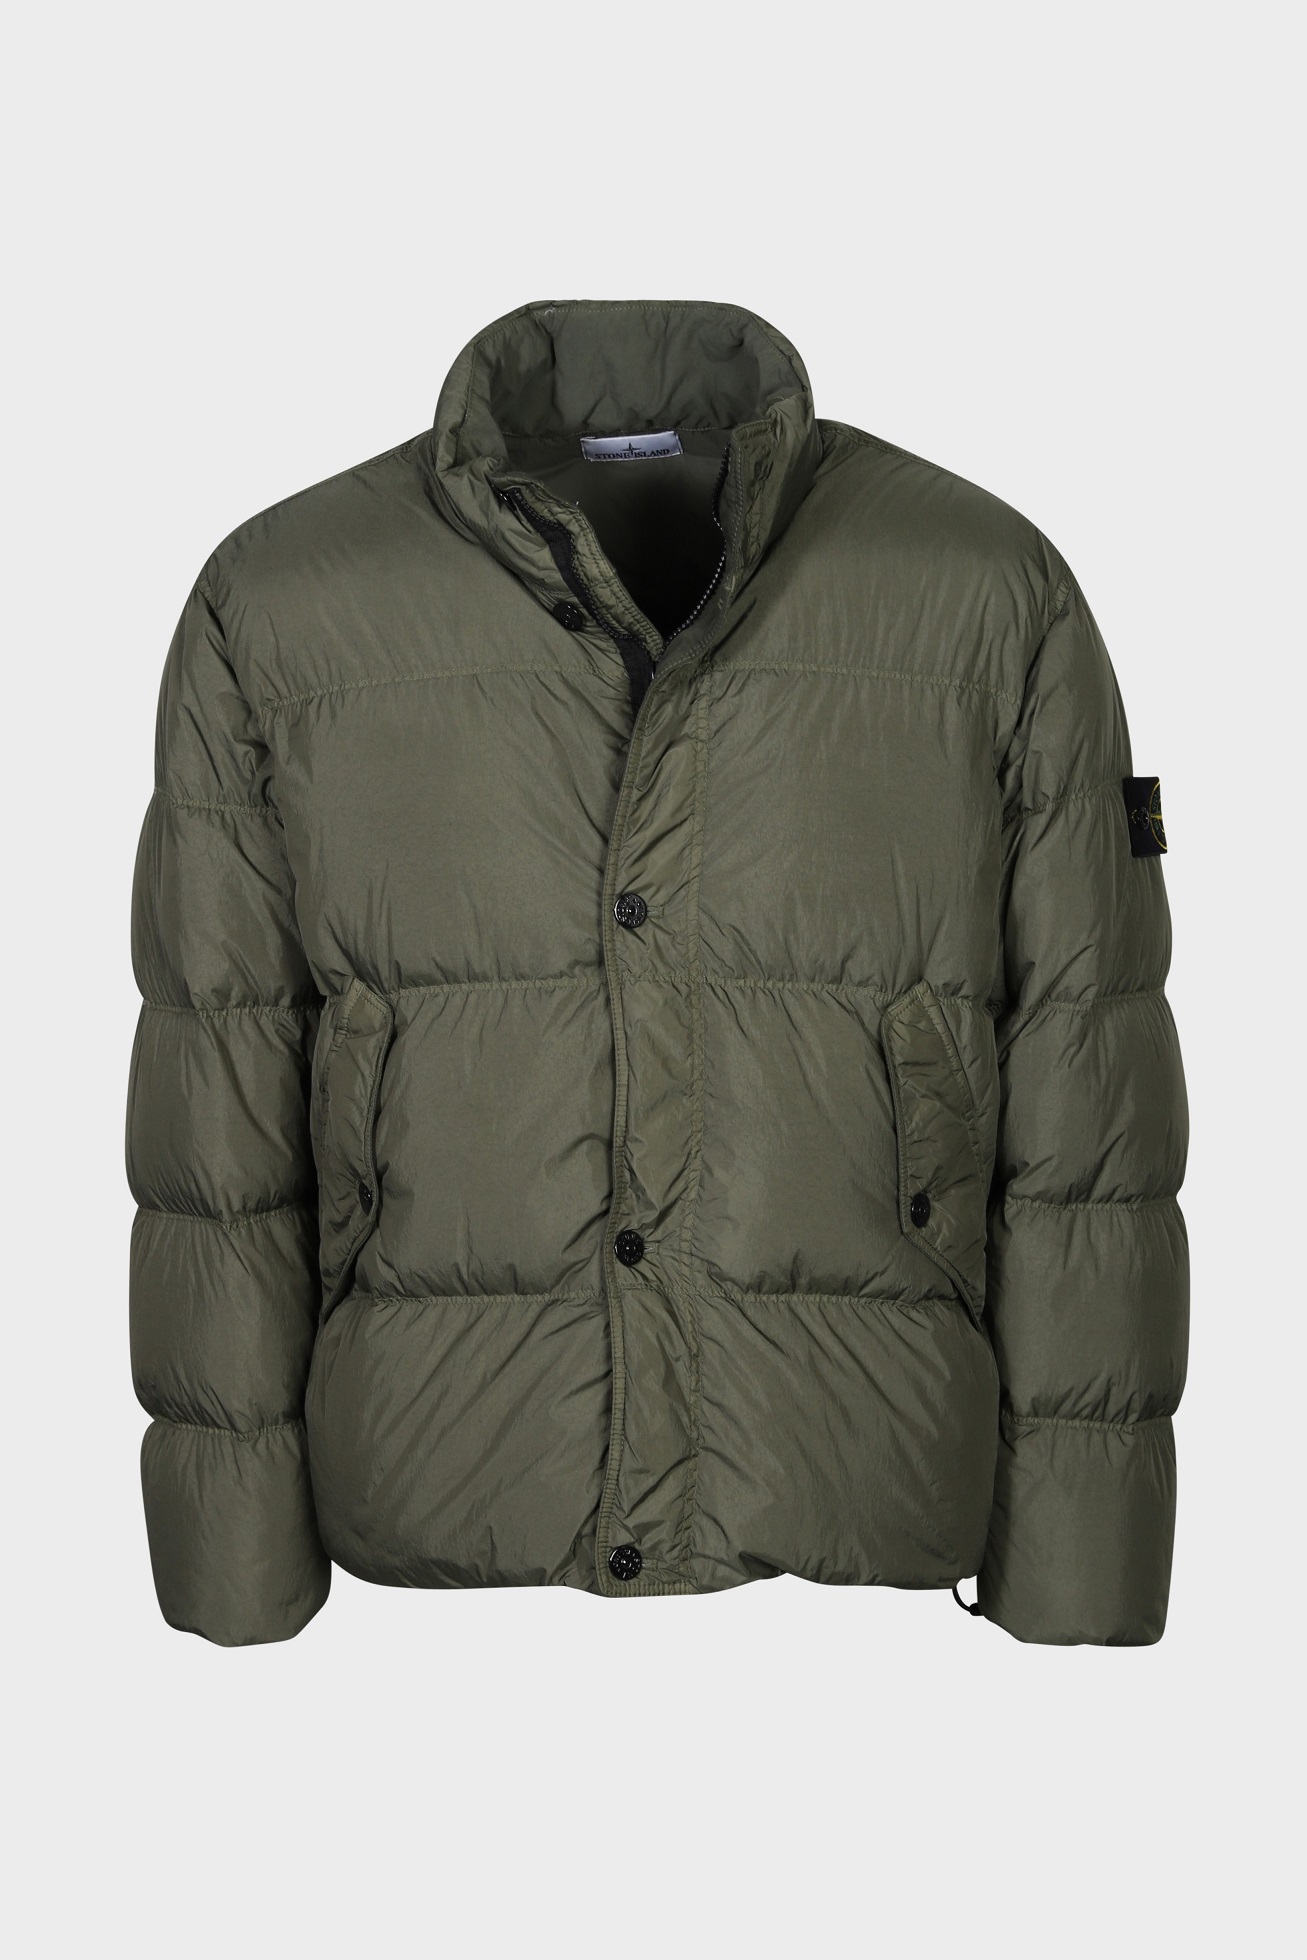 STONE ISLAND Garment Dyed Crinkle Reps Down Jacket in Olive